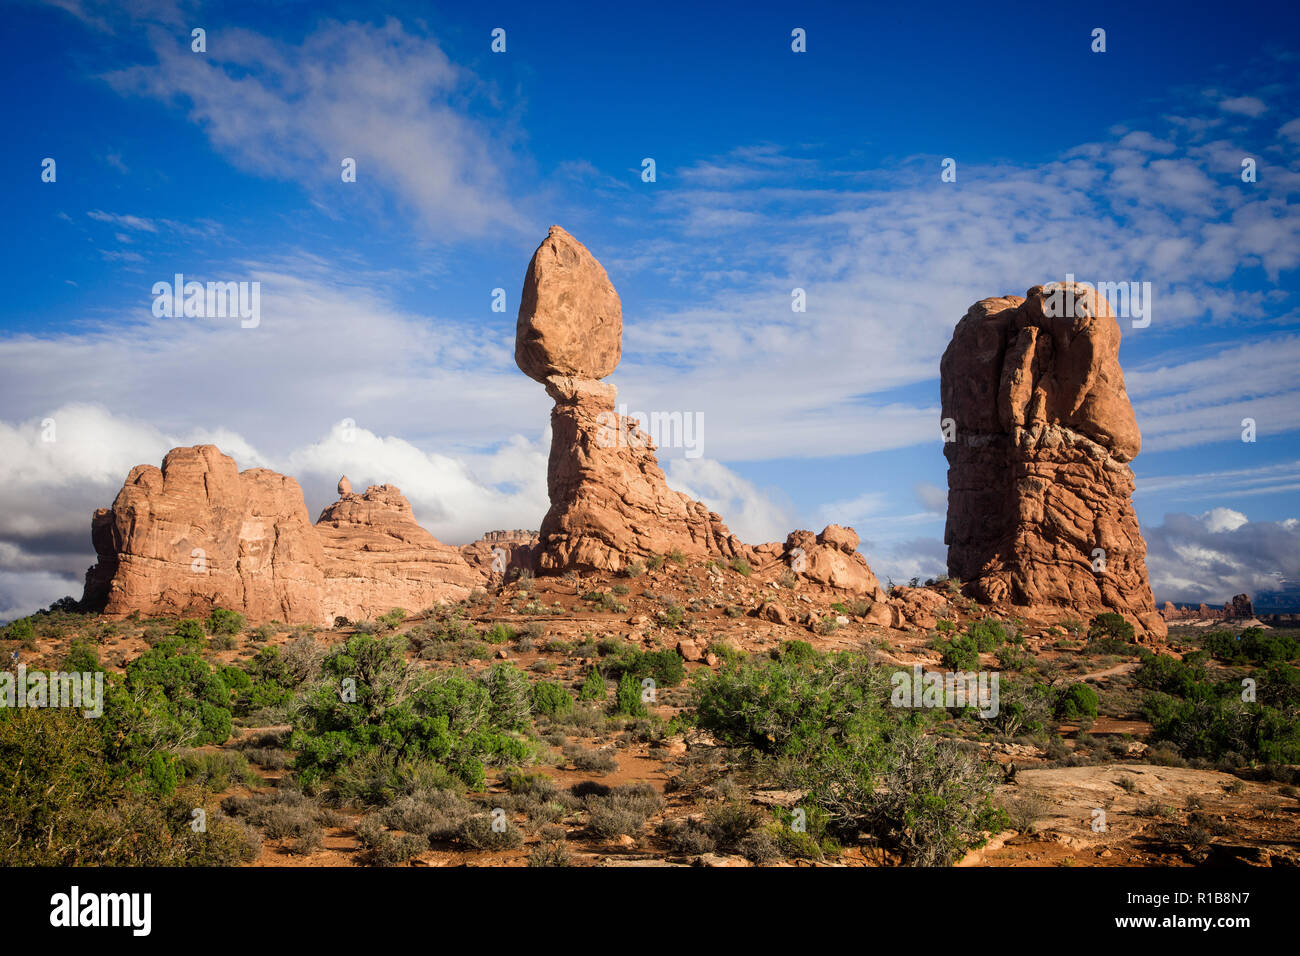 Balance Rock sits impossibly on top of its eroded pillar. Arches National Park, Utah. Stock Photo